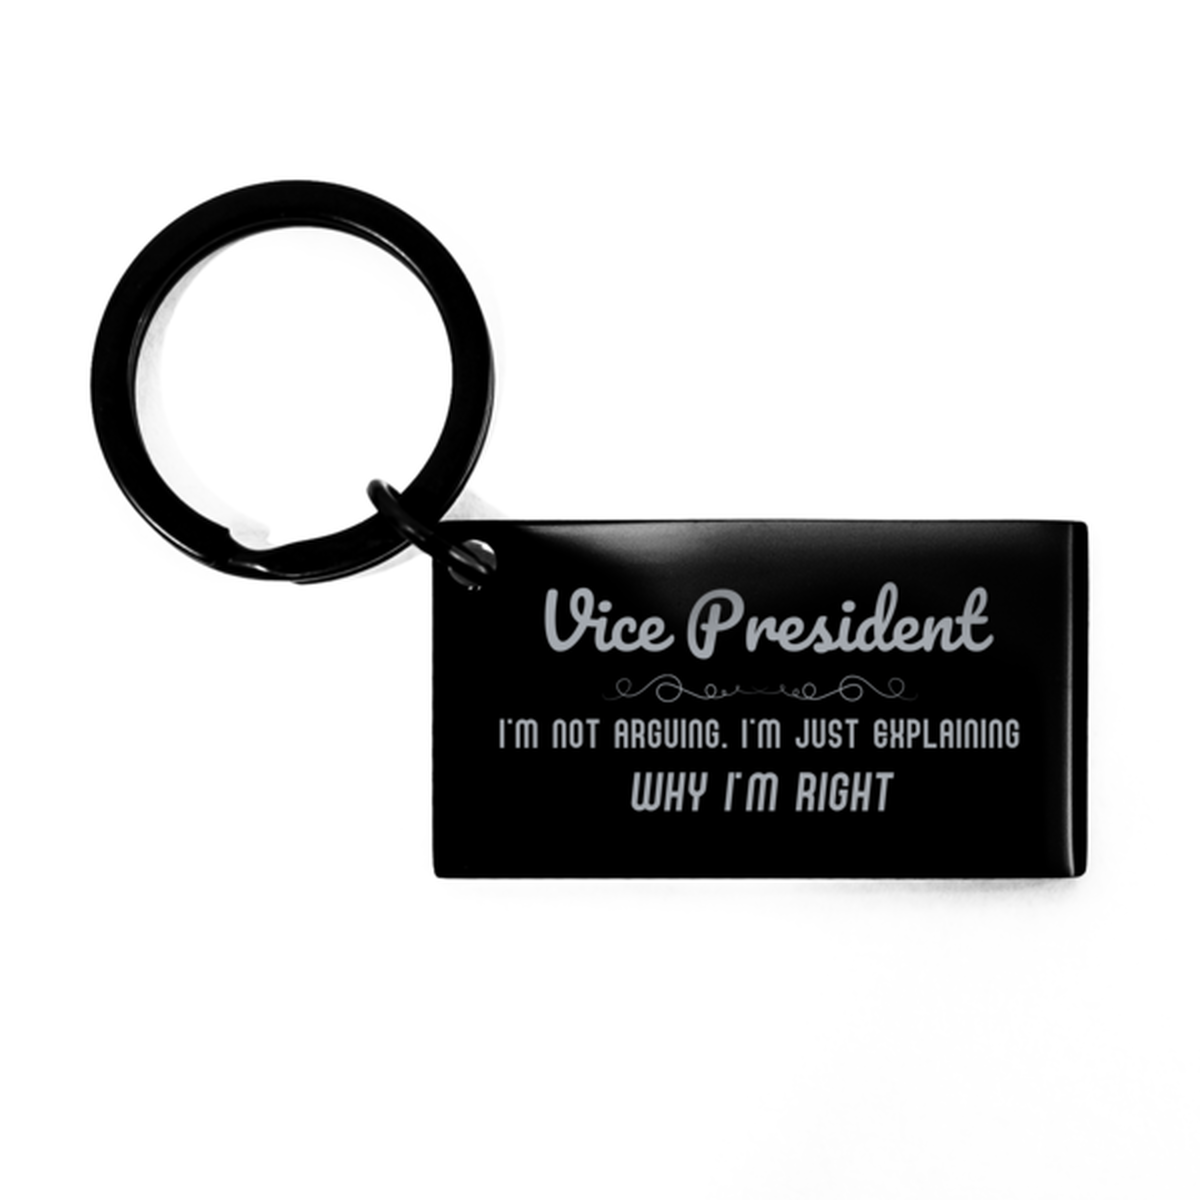 Vice President I'm not Arguing. I'm Just Explaining Why I'm RIGHT Keychain, Funny Saying Quote Vice President Gifts For Vice President Graduation Birthday Christmas Gifts for Men Women Coworker